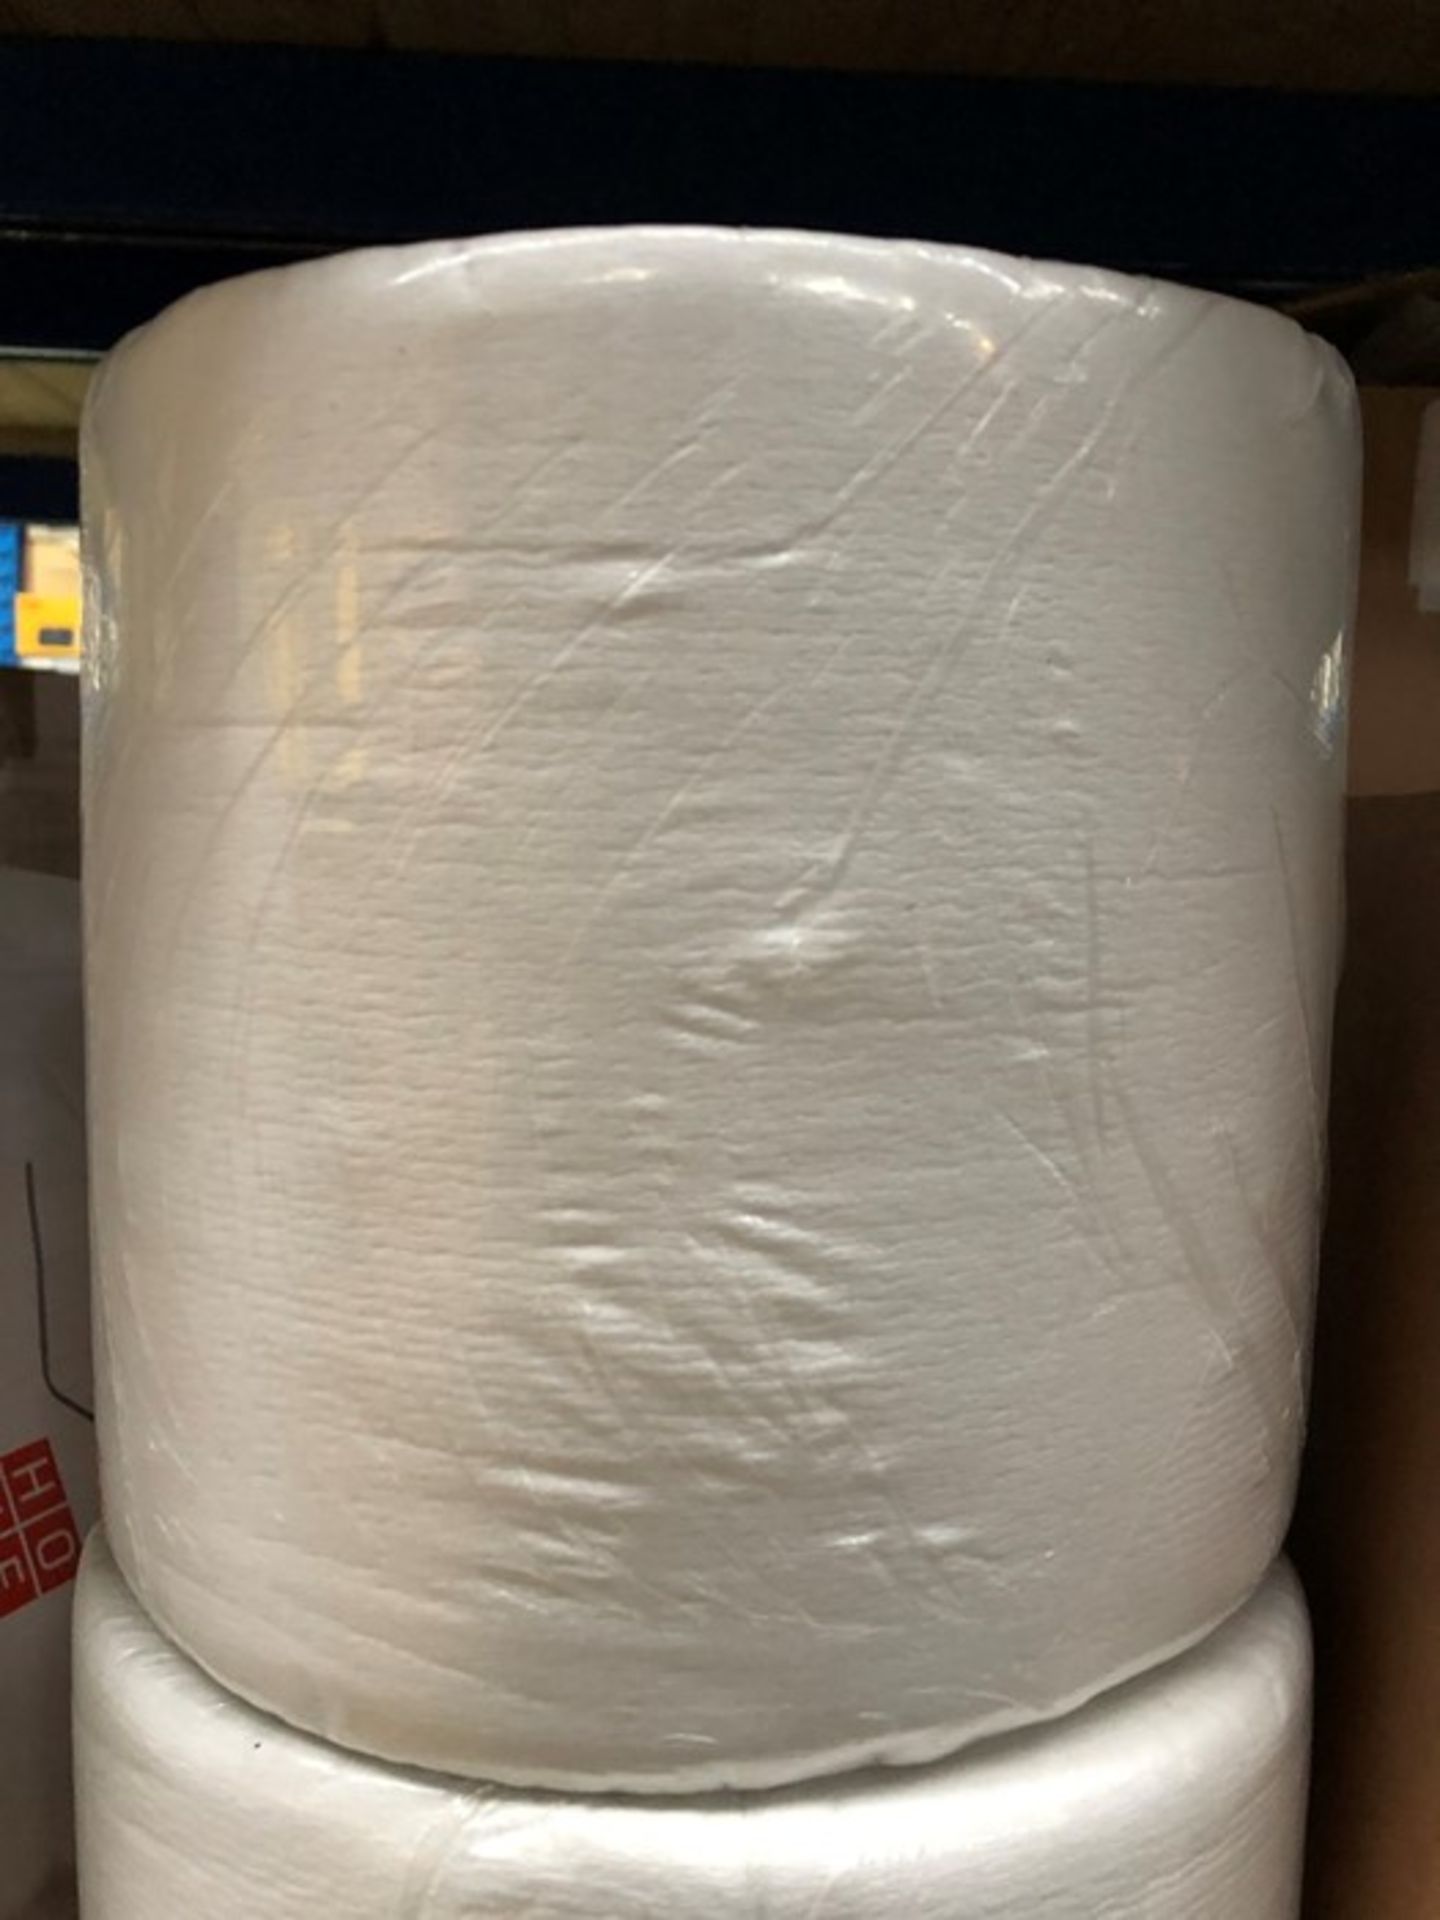 1 SEALED VERY LARGE TOILET ROLL/PAPER TOWEL (PUBLIC VIEWING AVAILABLE)